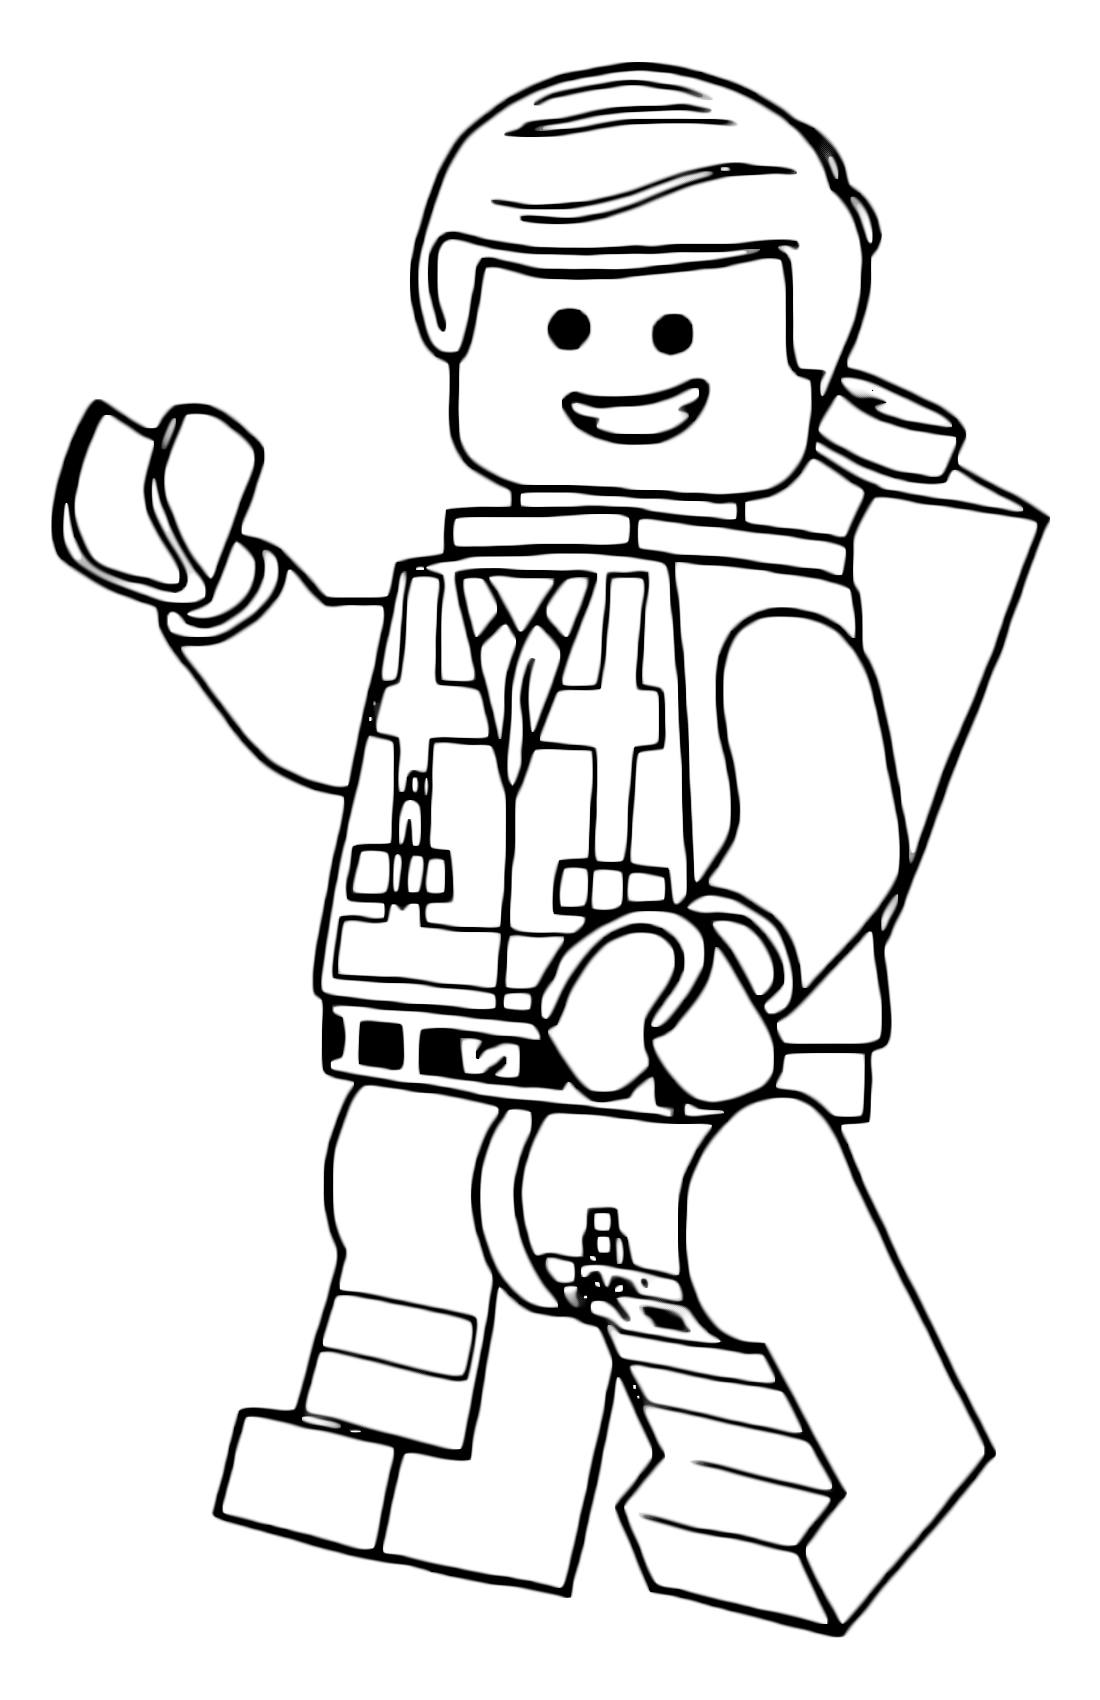 coloring page lego free printable lego coloring pages for kids cool2bkids lego coloring page 